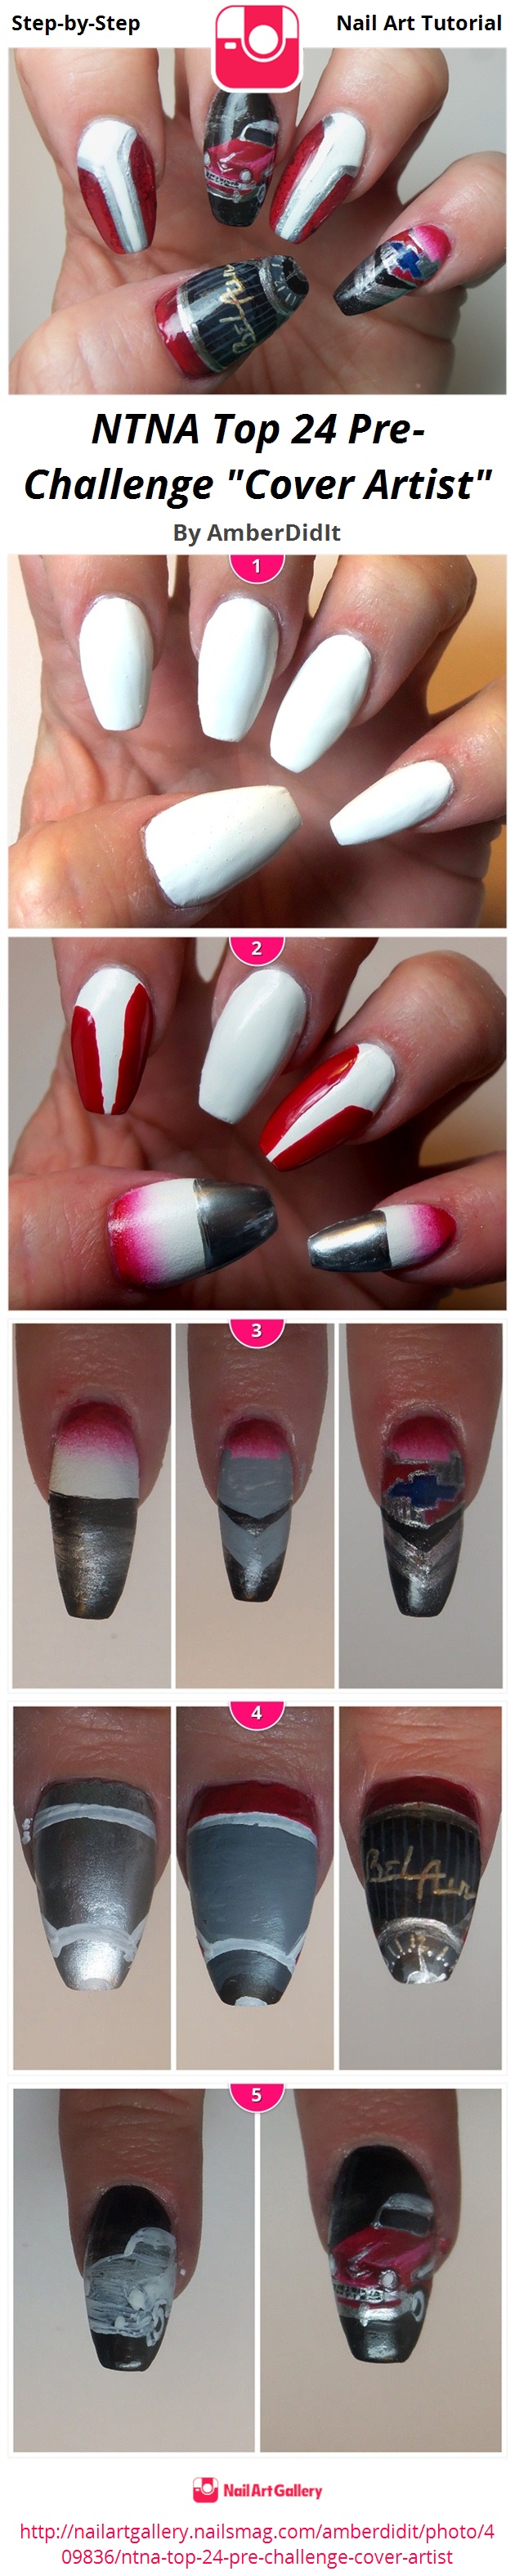 NTNA Top 24 Pre-Challenge "Cover Artist" - Nail Art Gallery